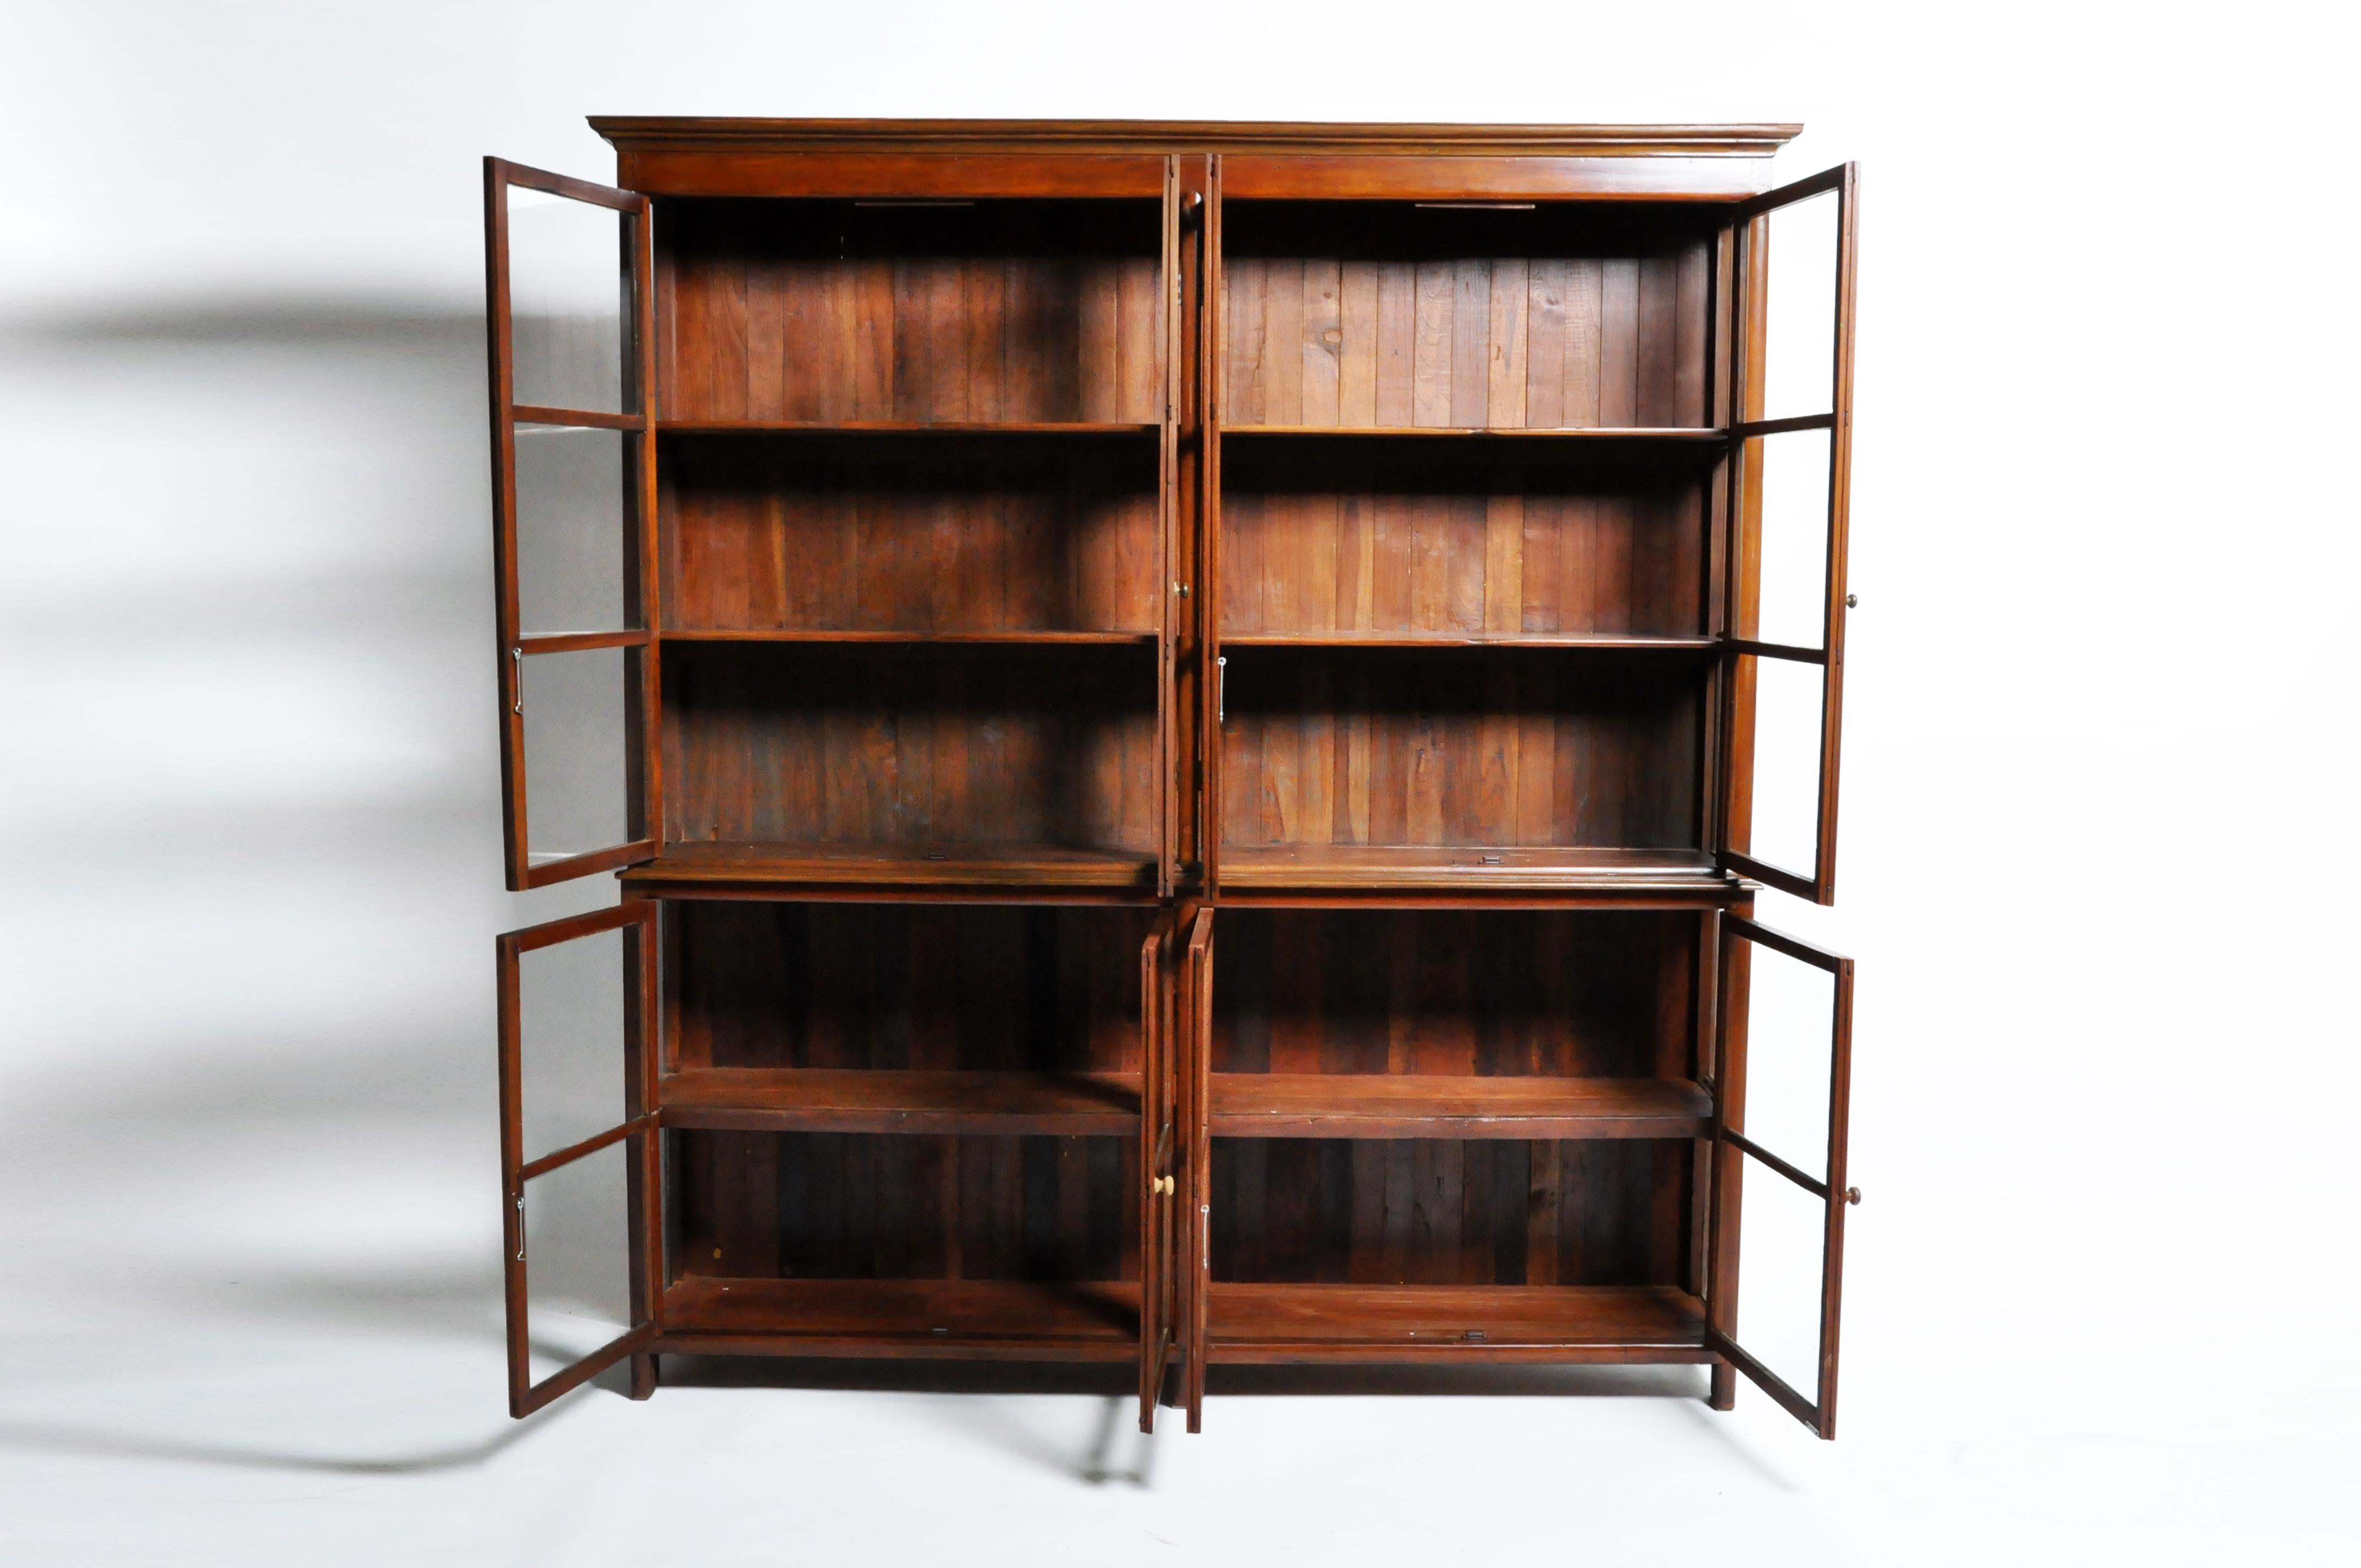 British Colonial Art Deco Breakfront Bookcase with Four Pairs of Doors 5